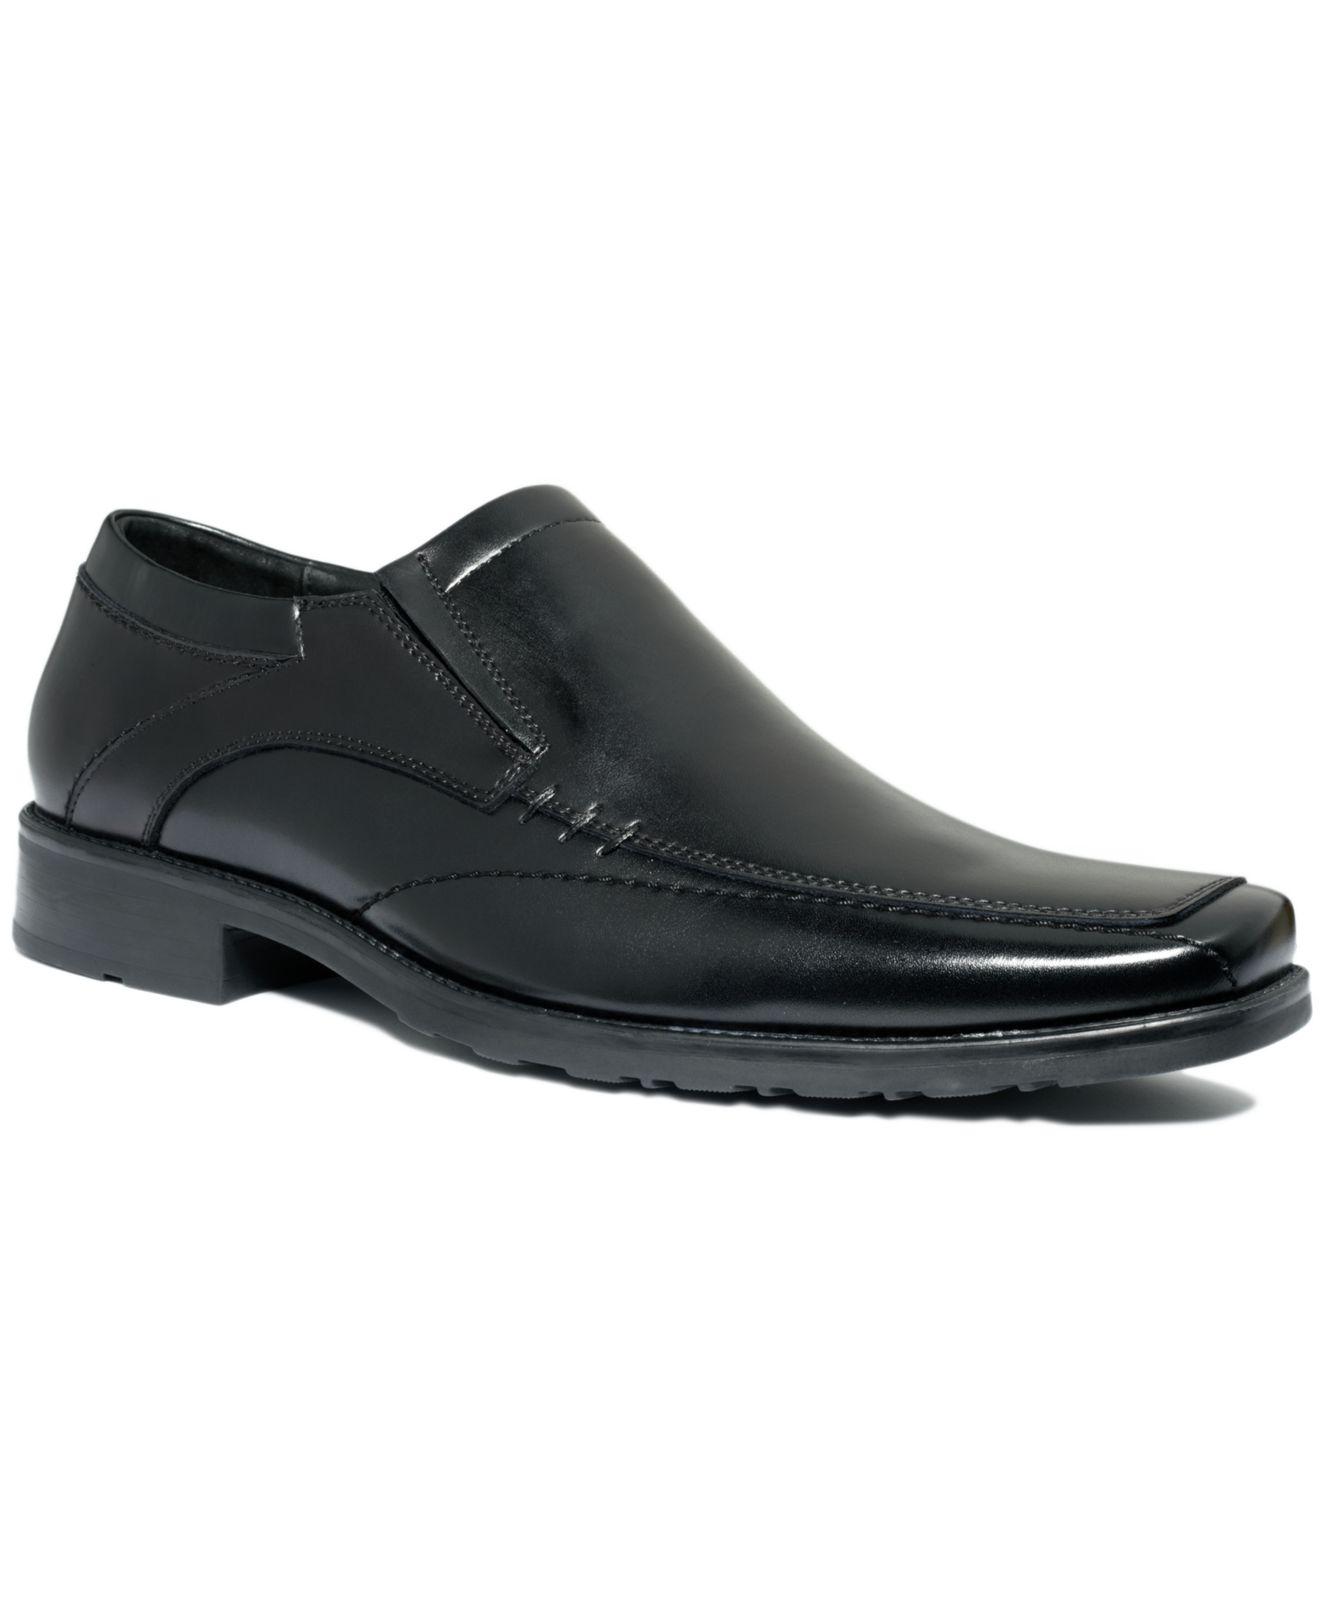 Kenneth cole reaction Shoes, Slick Deal Slip On Loafers in Black for ...